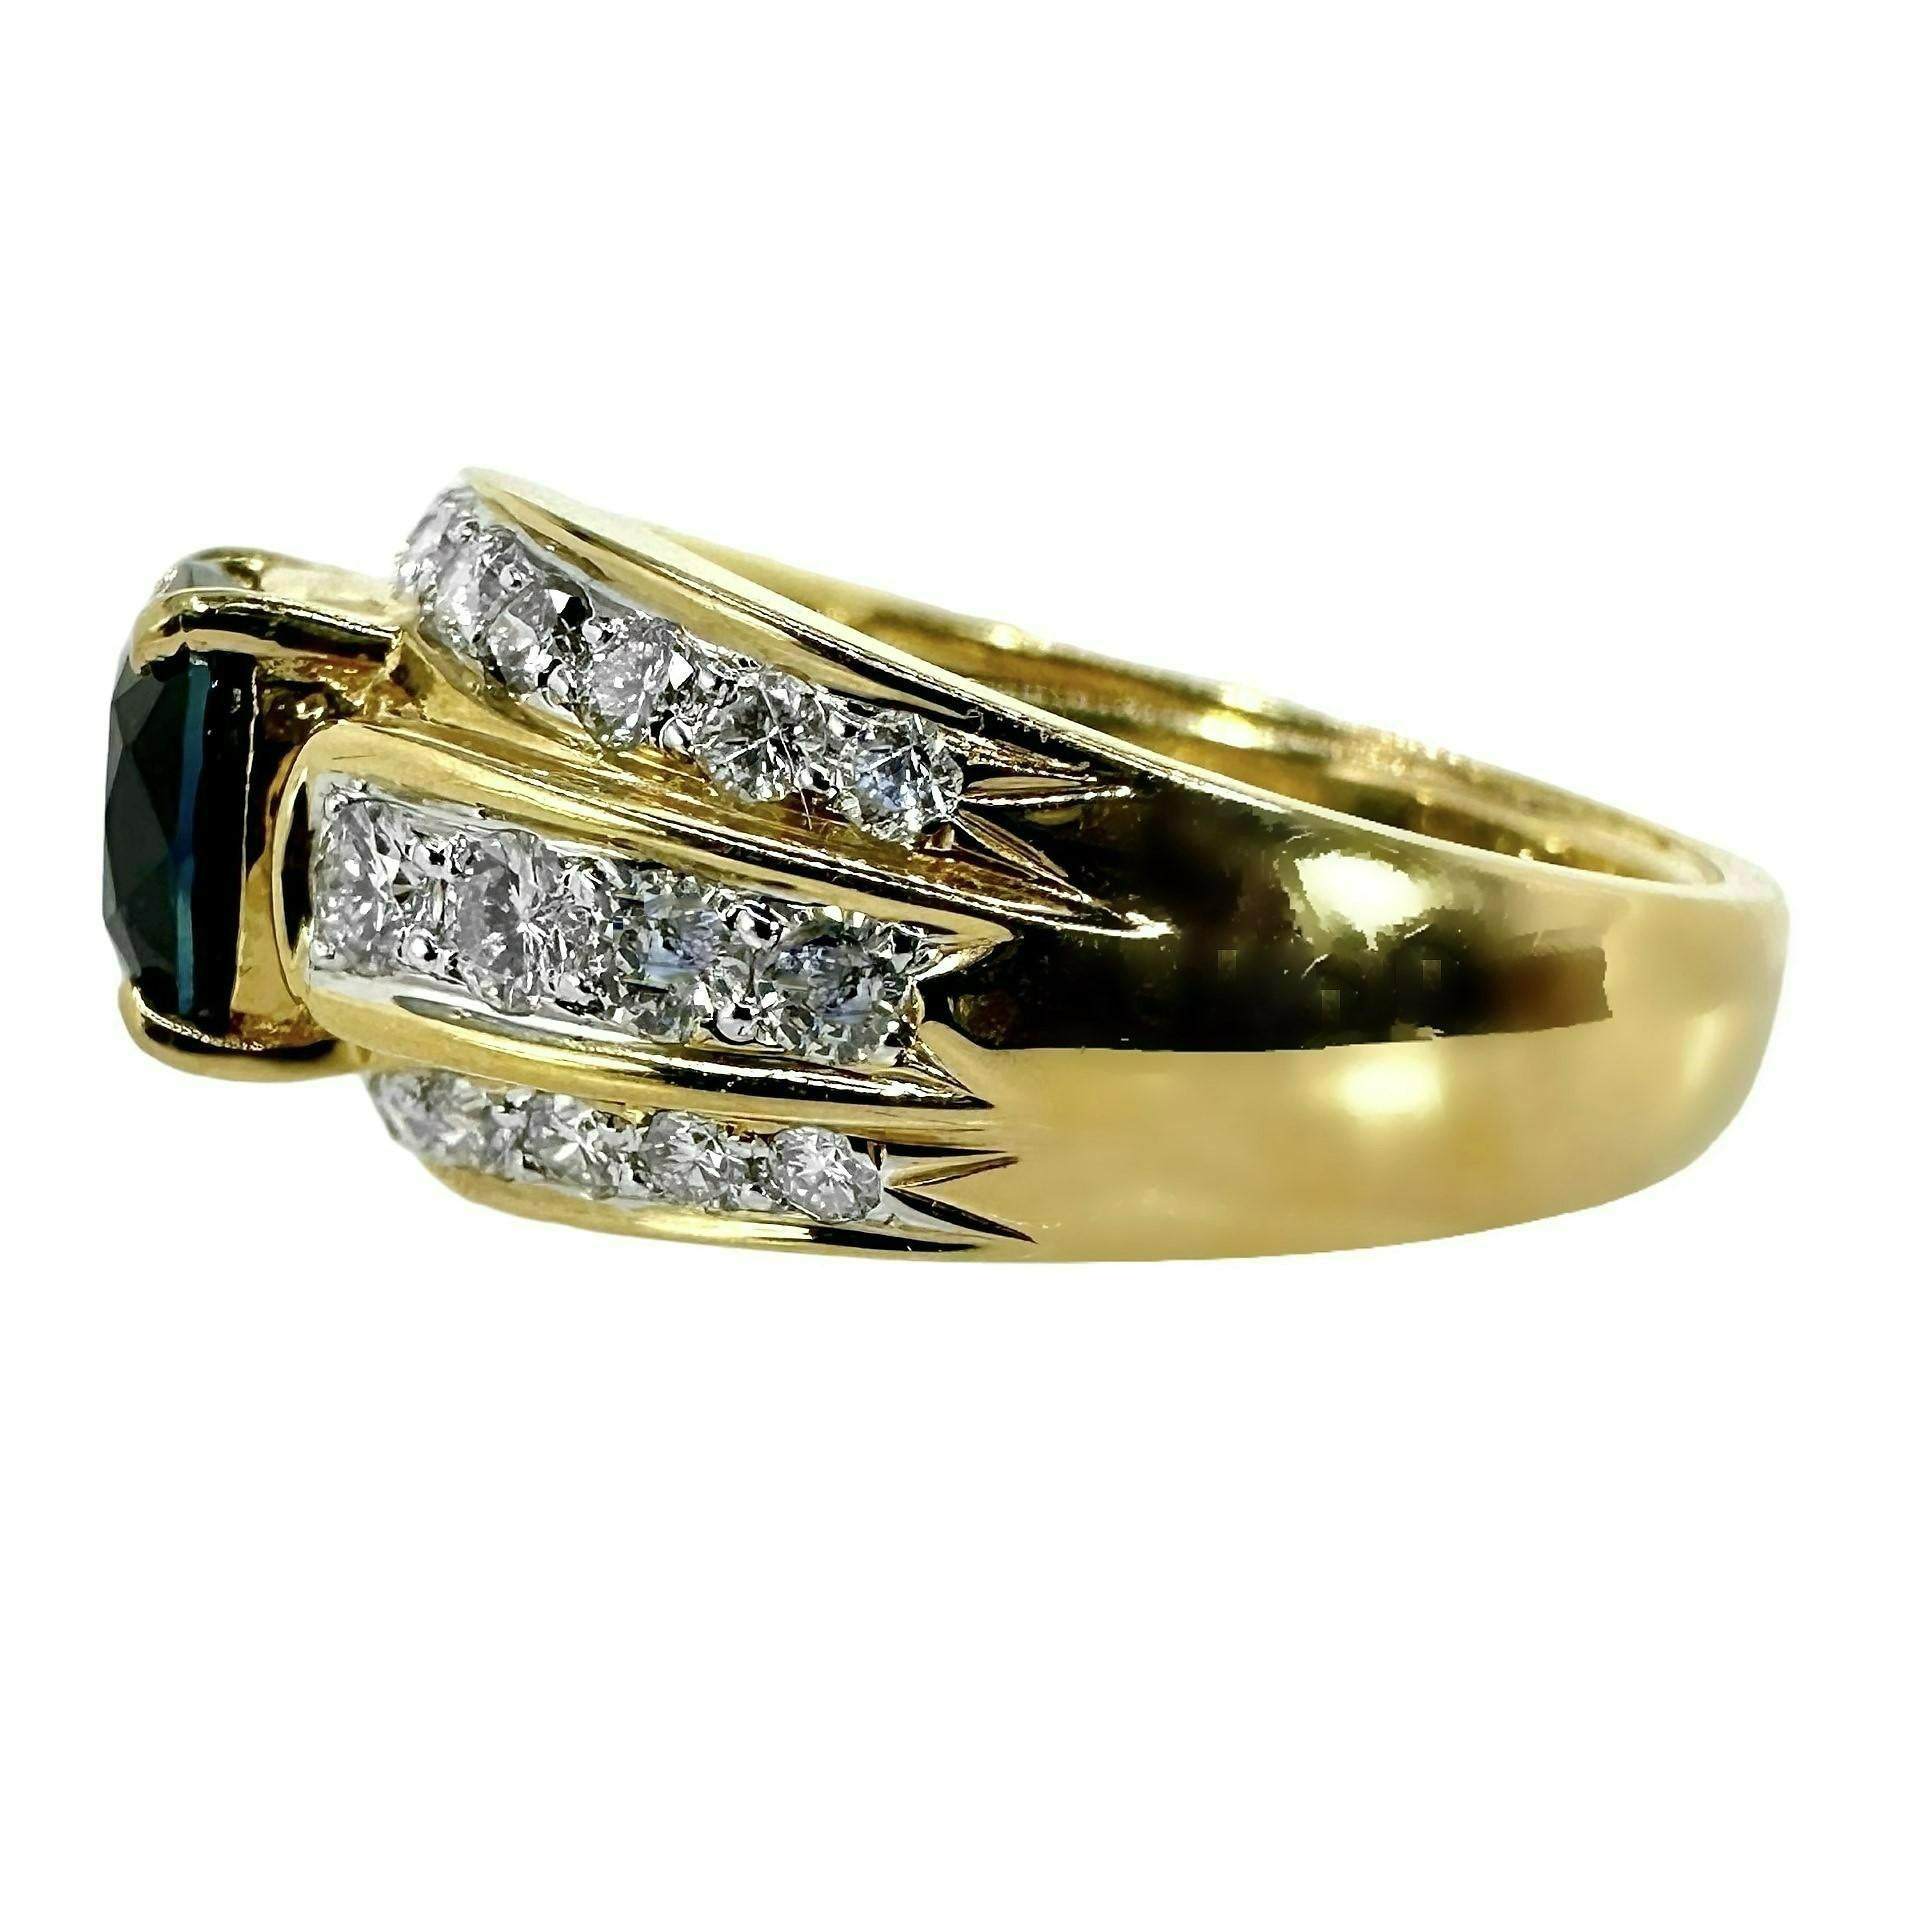 Brilliant Cut Mid-20th Century 18k Yellow Gold Cocktail Ring with 2.67Ct Sapphire & Diamonds For Sale